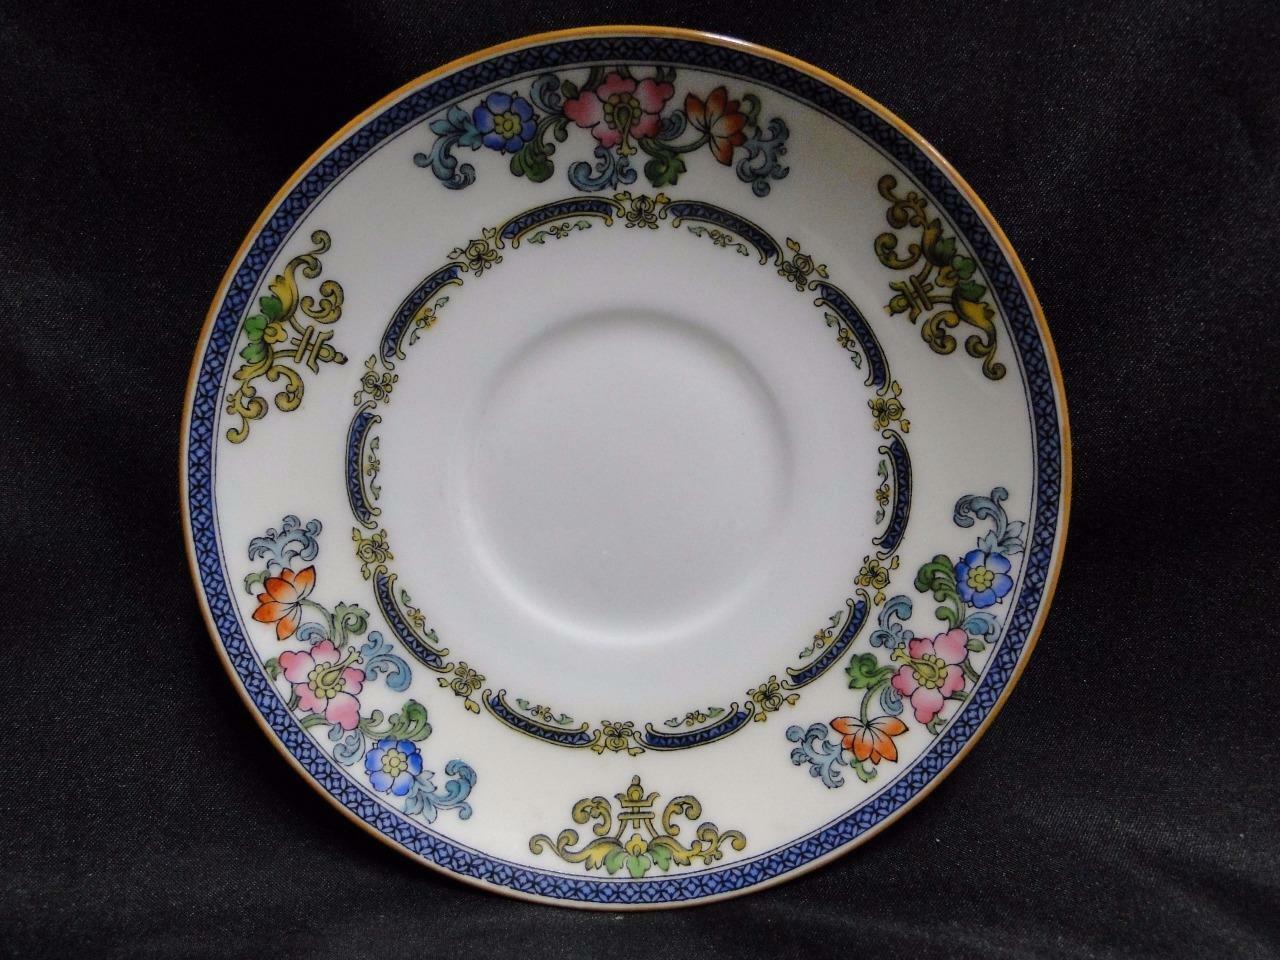 Minton B898, Blue Bands, Florals, Smooth: 5 3/4" Saucer (s) Only, No Cup